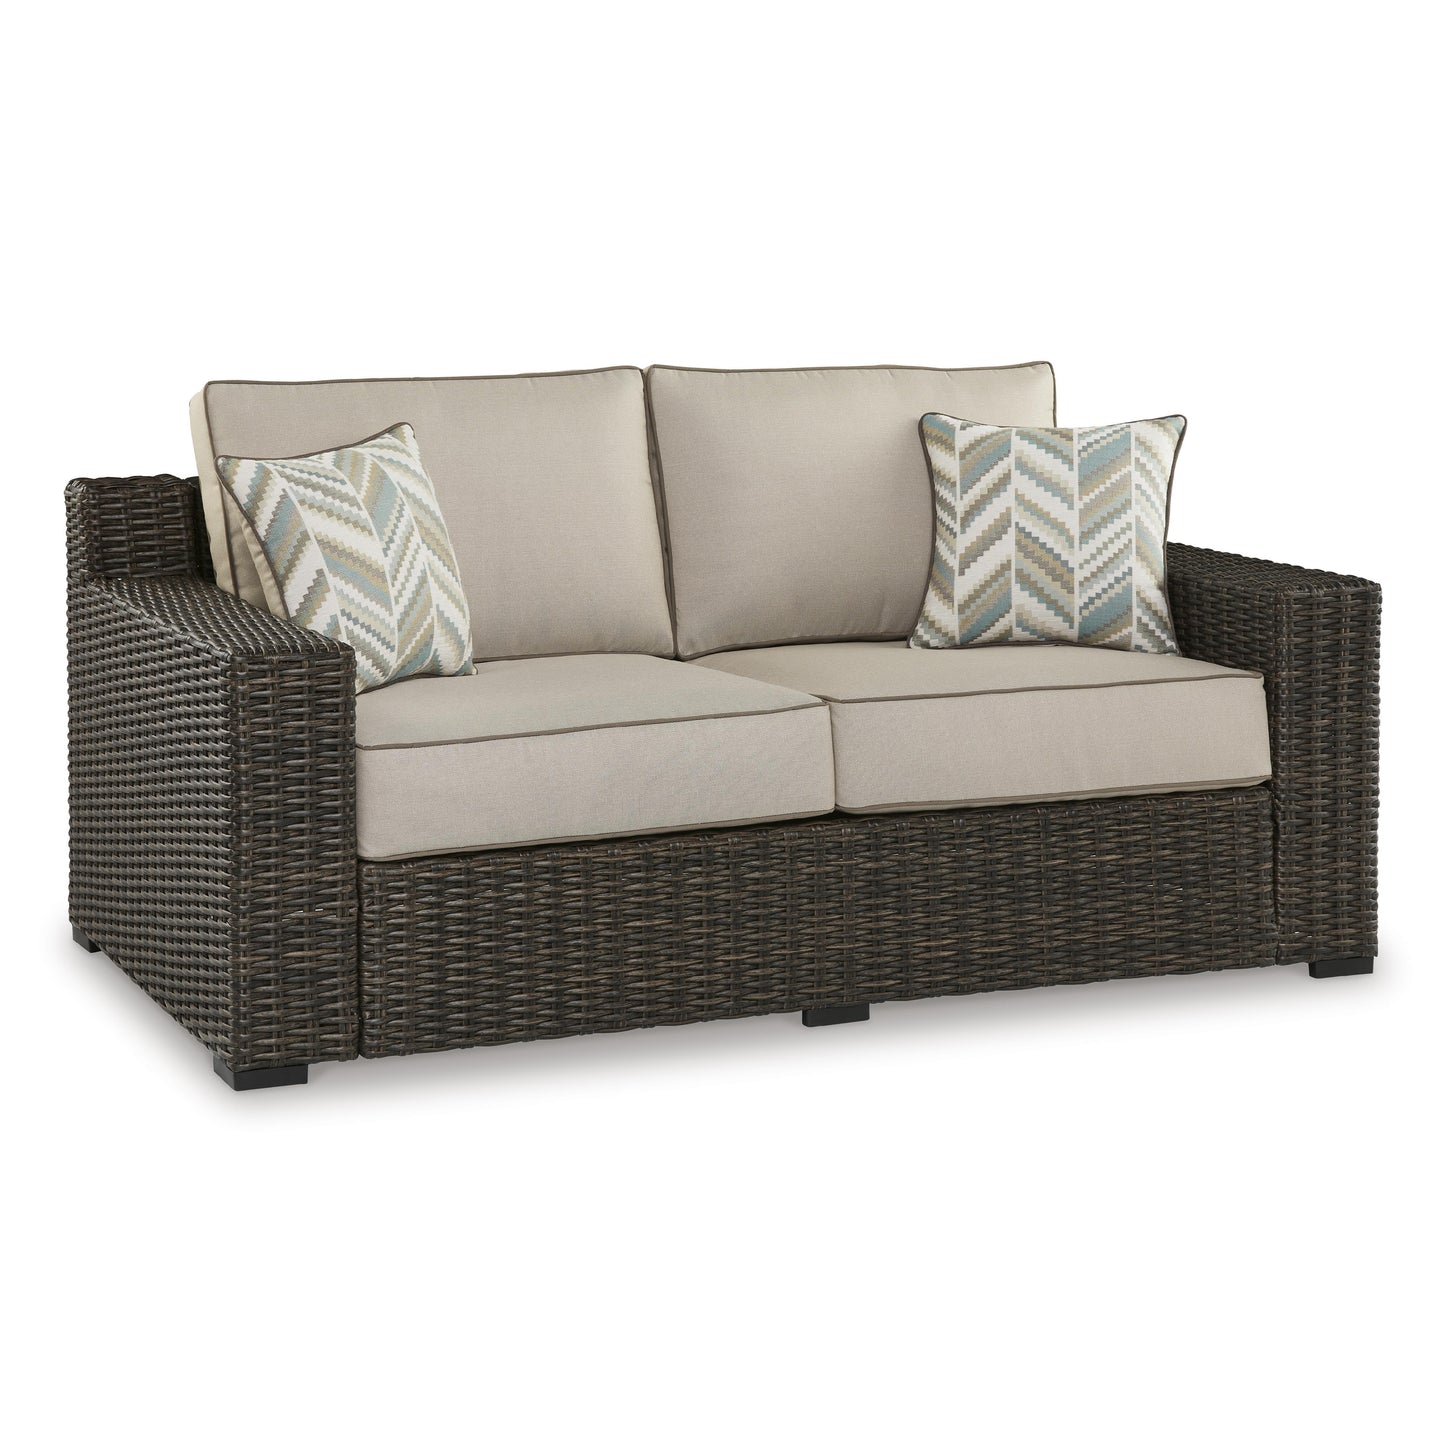 Signature Design by Ashley Outdoor Seating Loveseats P784-835 IMAGE 1